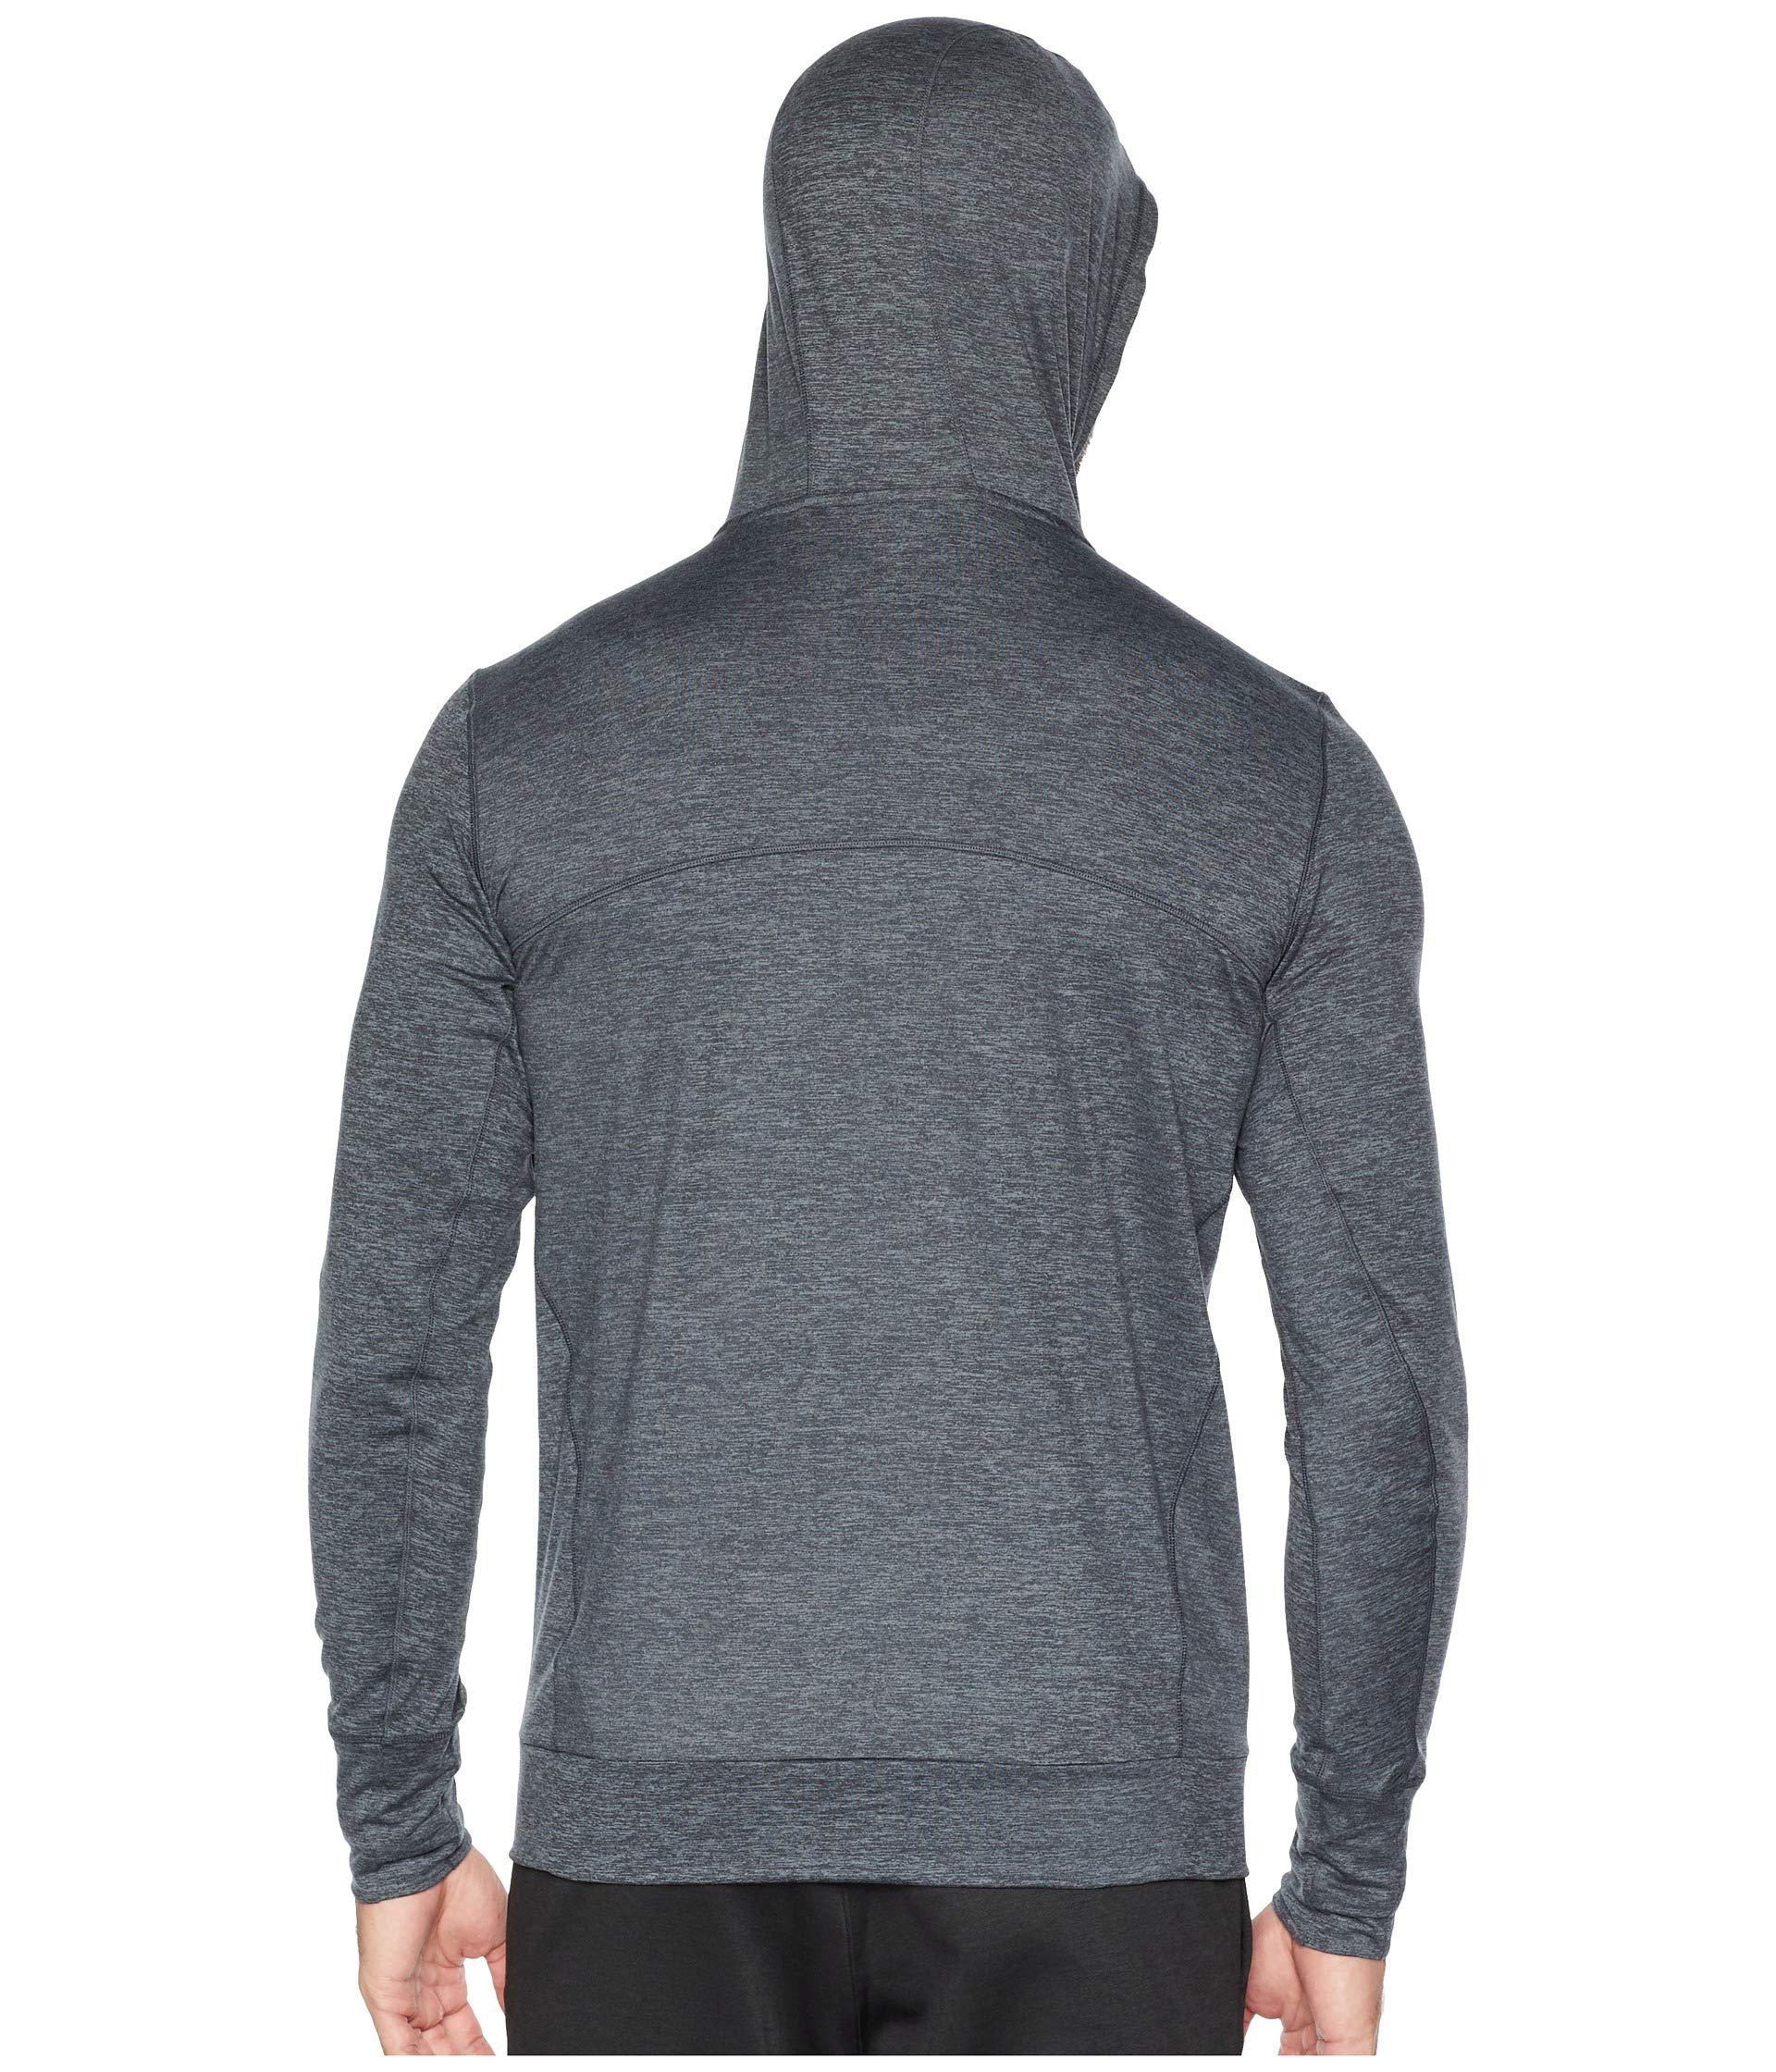 Brooks Synthetic Dash Hoodie in Heather Asphalt (Gray) for Men - Lyst